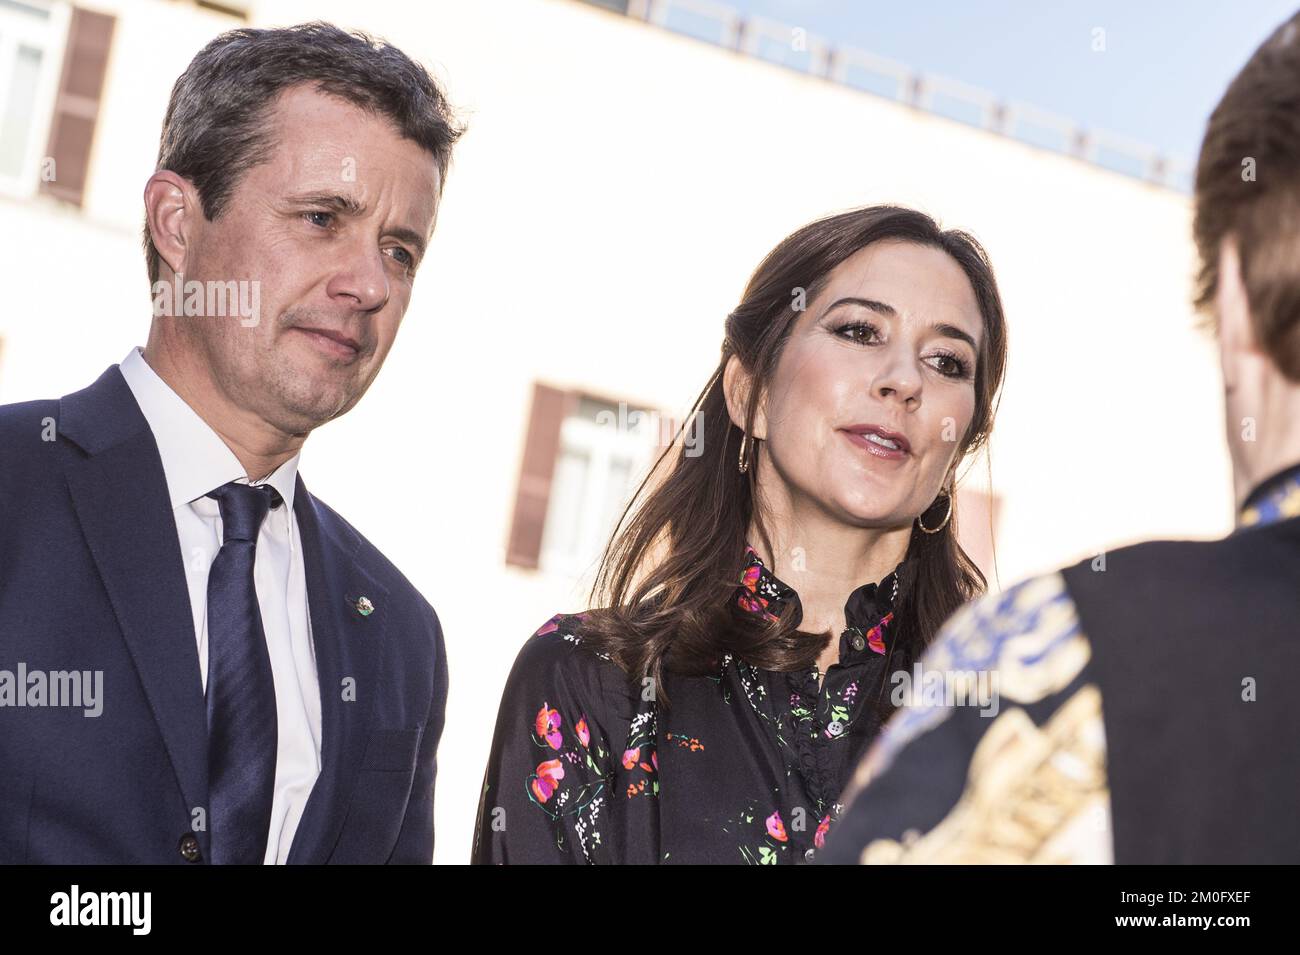 On November 8th 2018 TRH Crown Prince Frederik and Crown Princess Mary visited the Bambino Gesu children's hospital in Rome. Crown Princess Mary met with patients and tased to staff. The visit is part of the business delegation tour of Rome from November 6th to 8th. Stock Photo